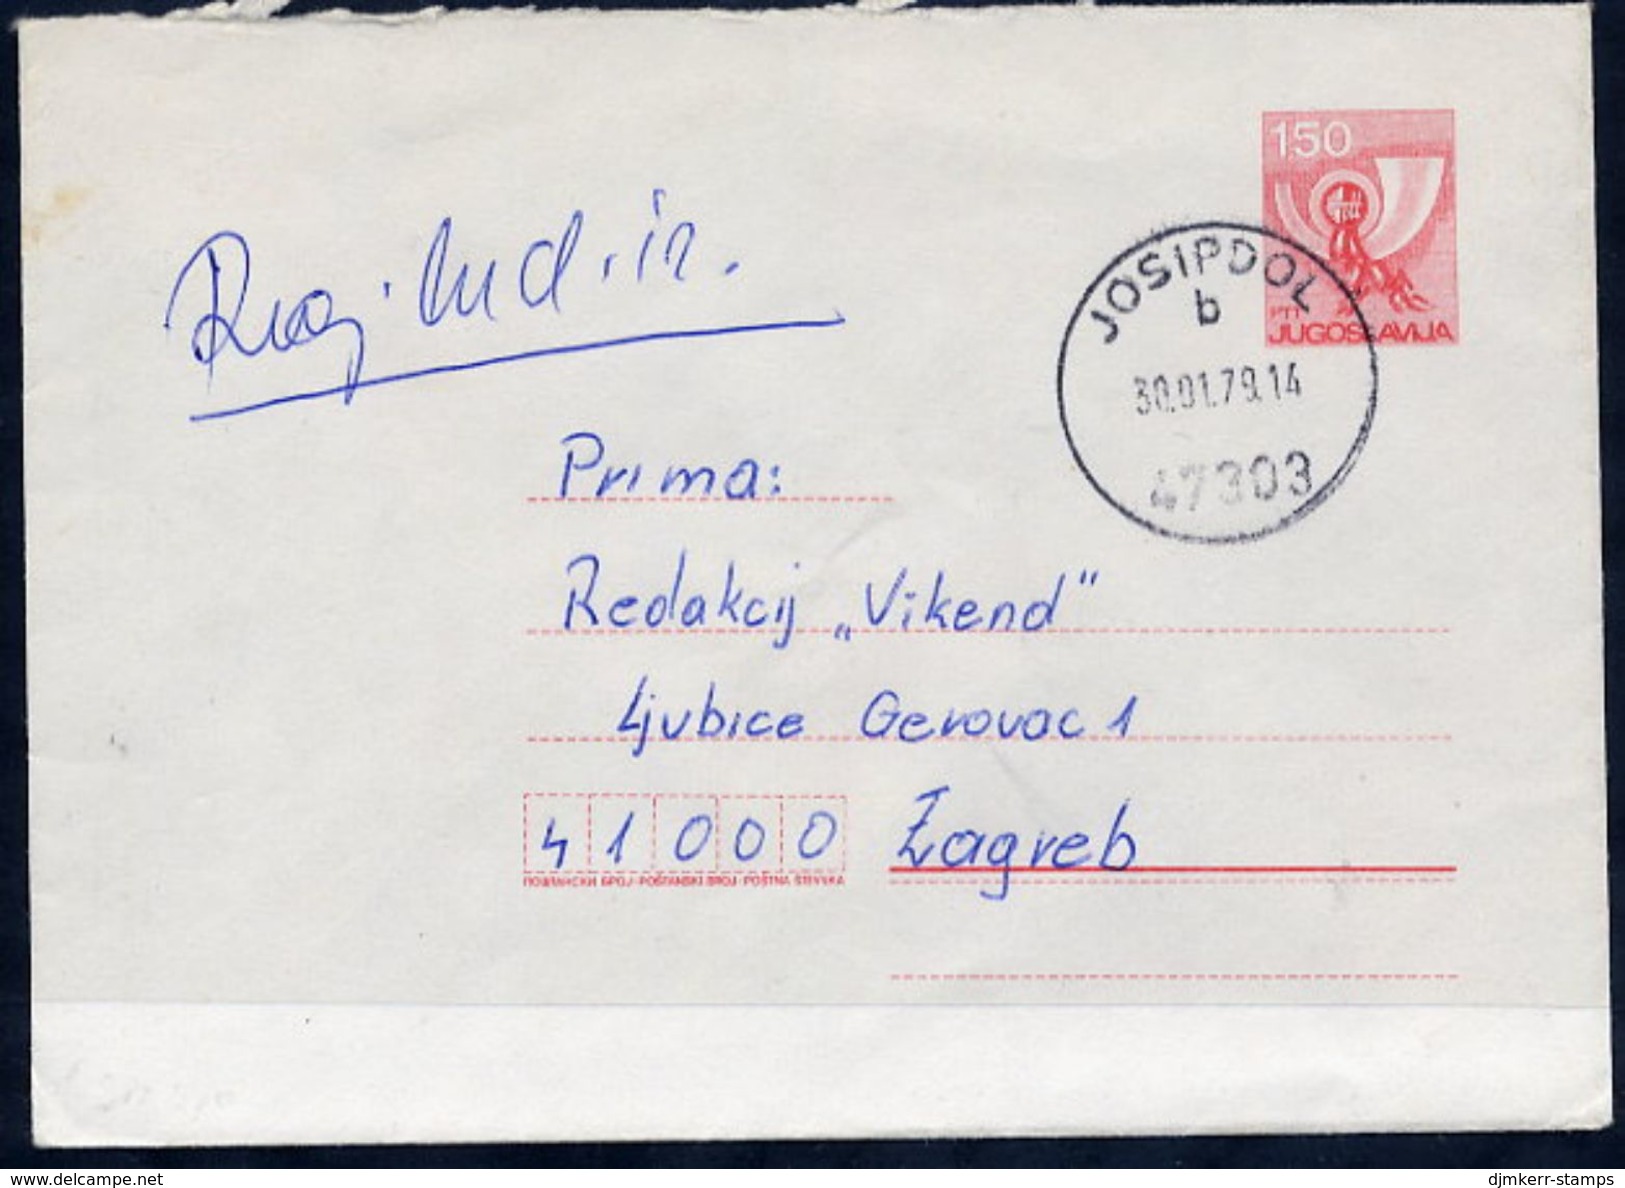 YUGOSLAVIA 1977 Posthorn 1.50 D.stationery Envelope Used Without Additional Franking.  Michel U70 - Entiers Postaux